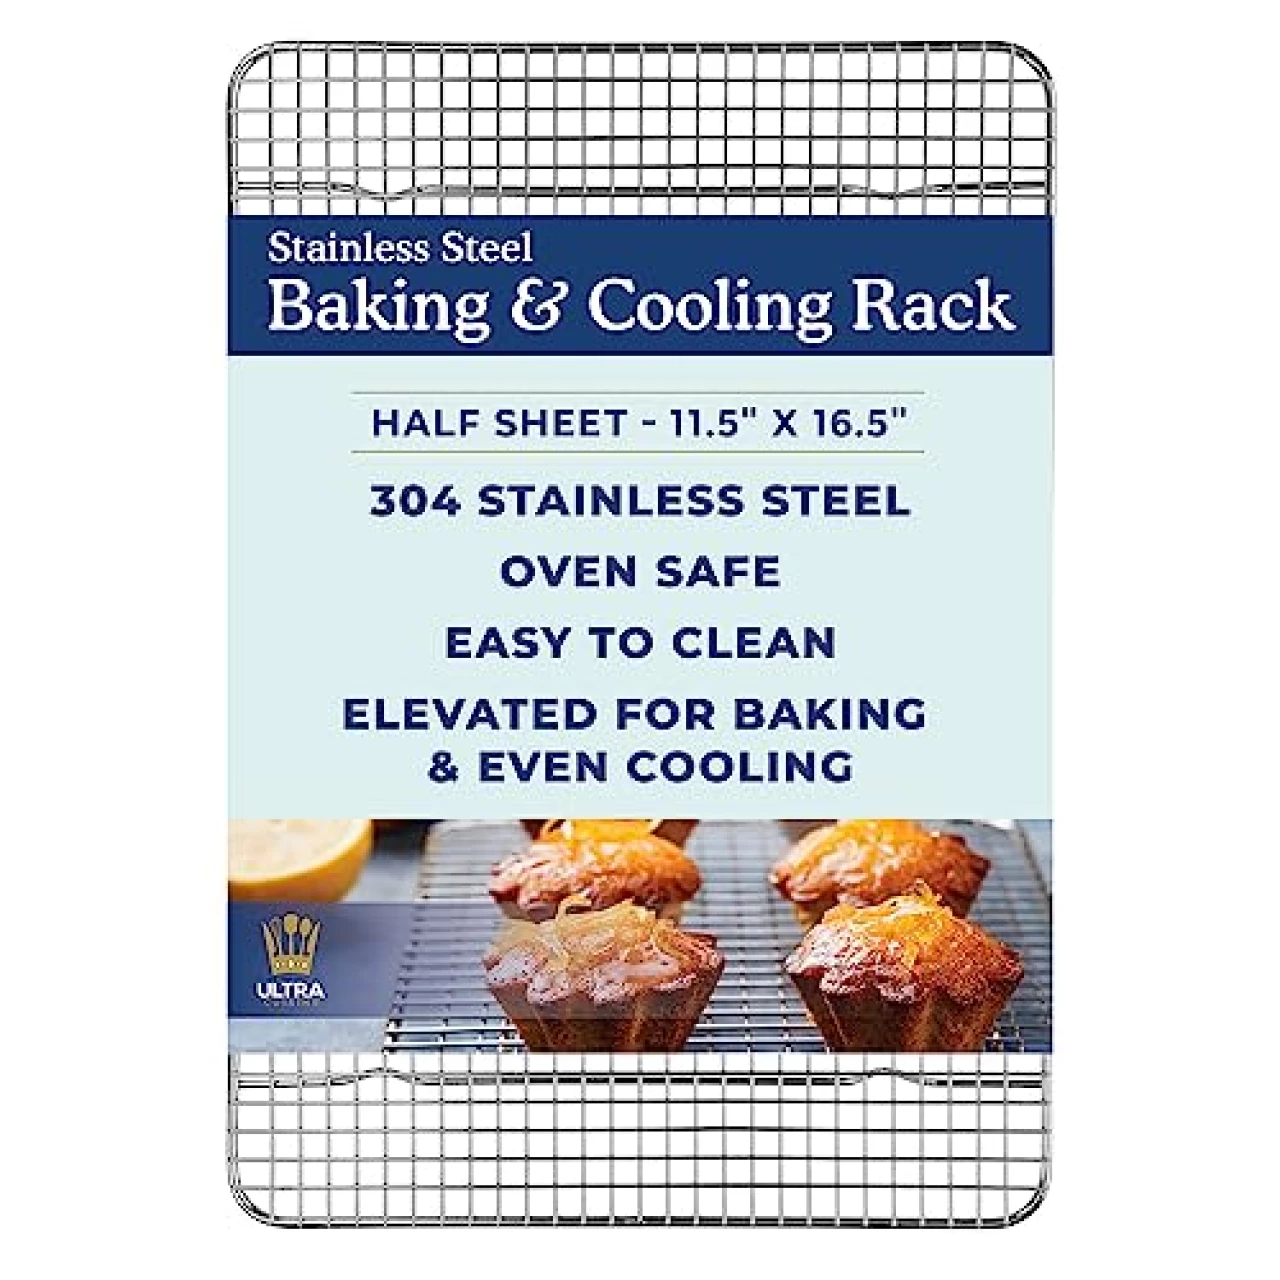 Ultra Cuisine Heavy Duty Cooling Rack for Cooking and Baking - 100% Stainless Steel Baking Rack &amp; Wire Cooling Rack - Cookie Cooling Racks for Baking - Food Safe - Fits Half Sheet Pans - 11.5&quot; x 16.5&quot;